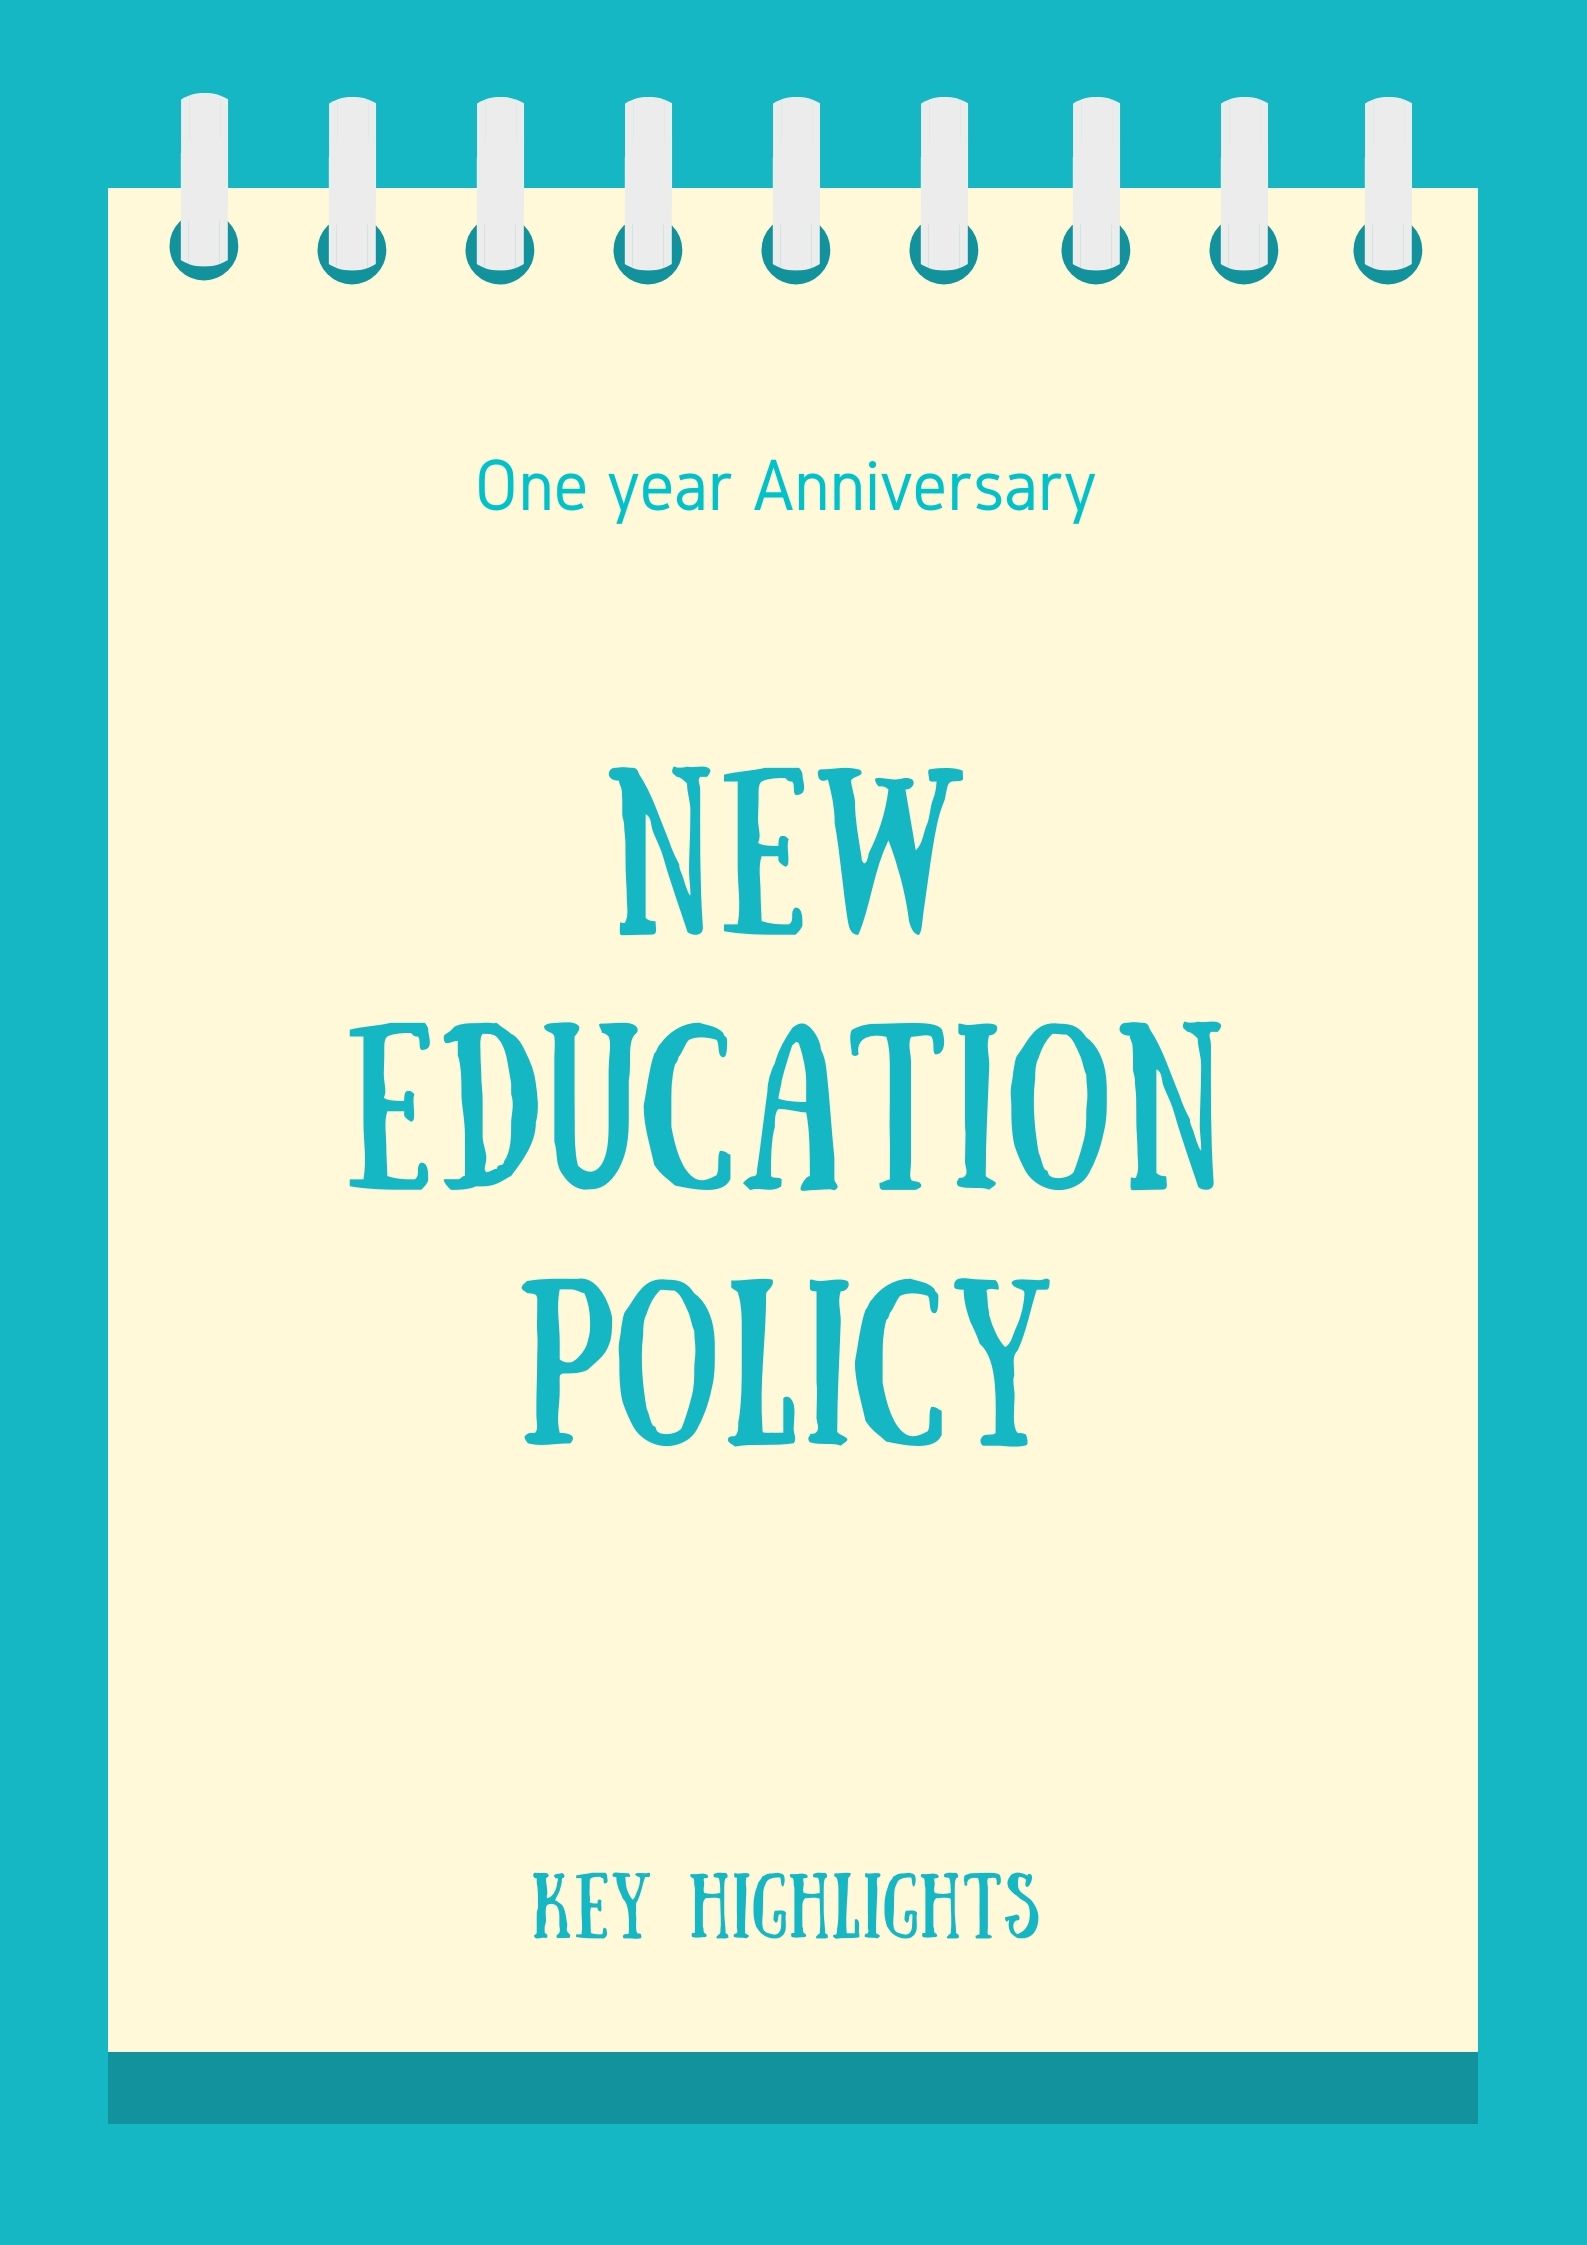 One year to New Education Policy 2020 - What has changed?